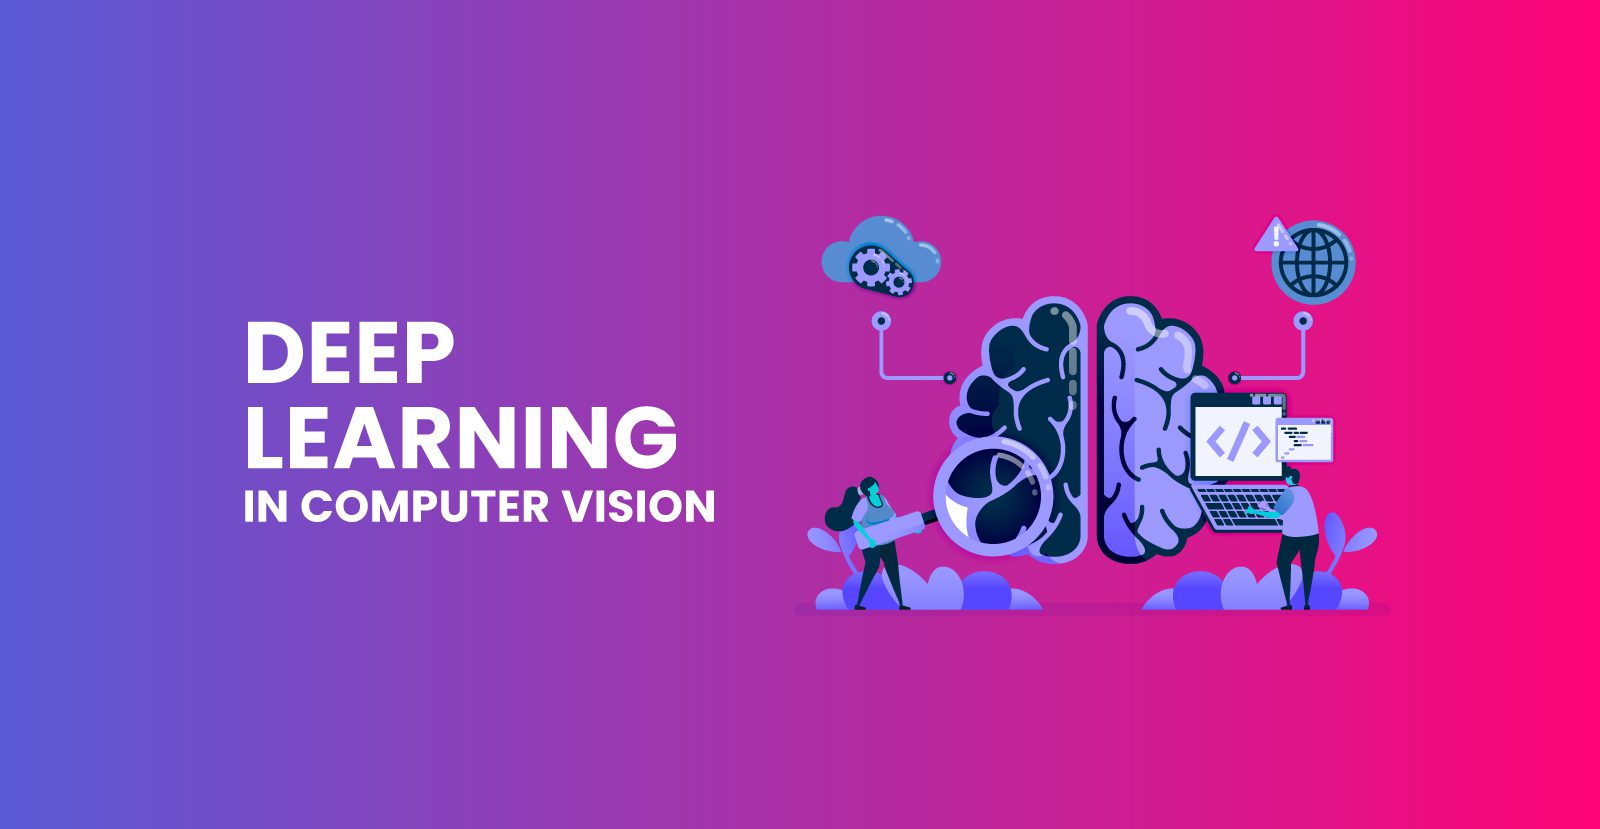 Deep learning in computer vision